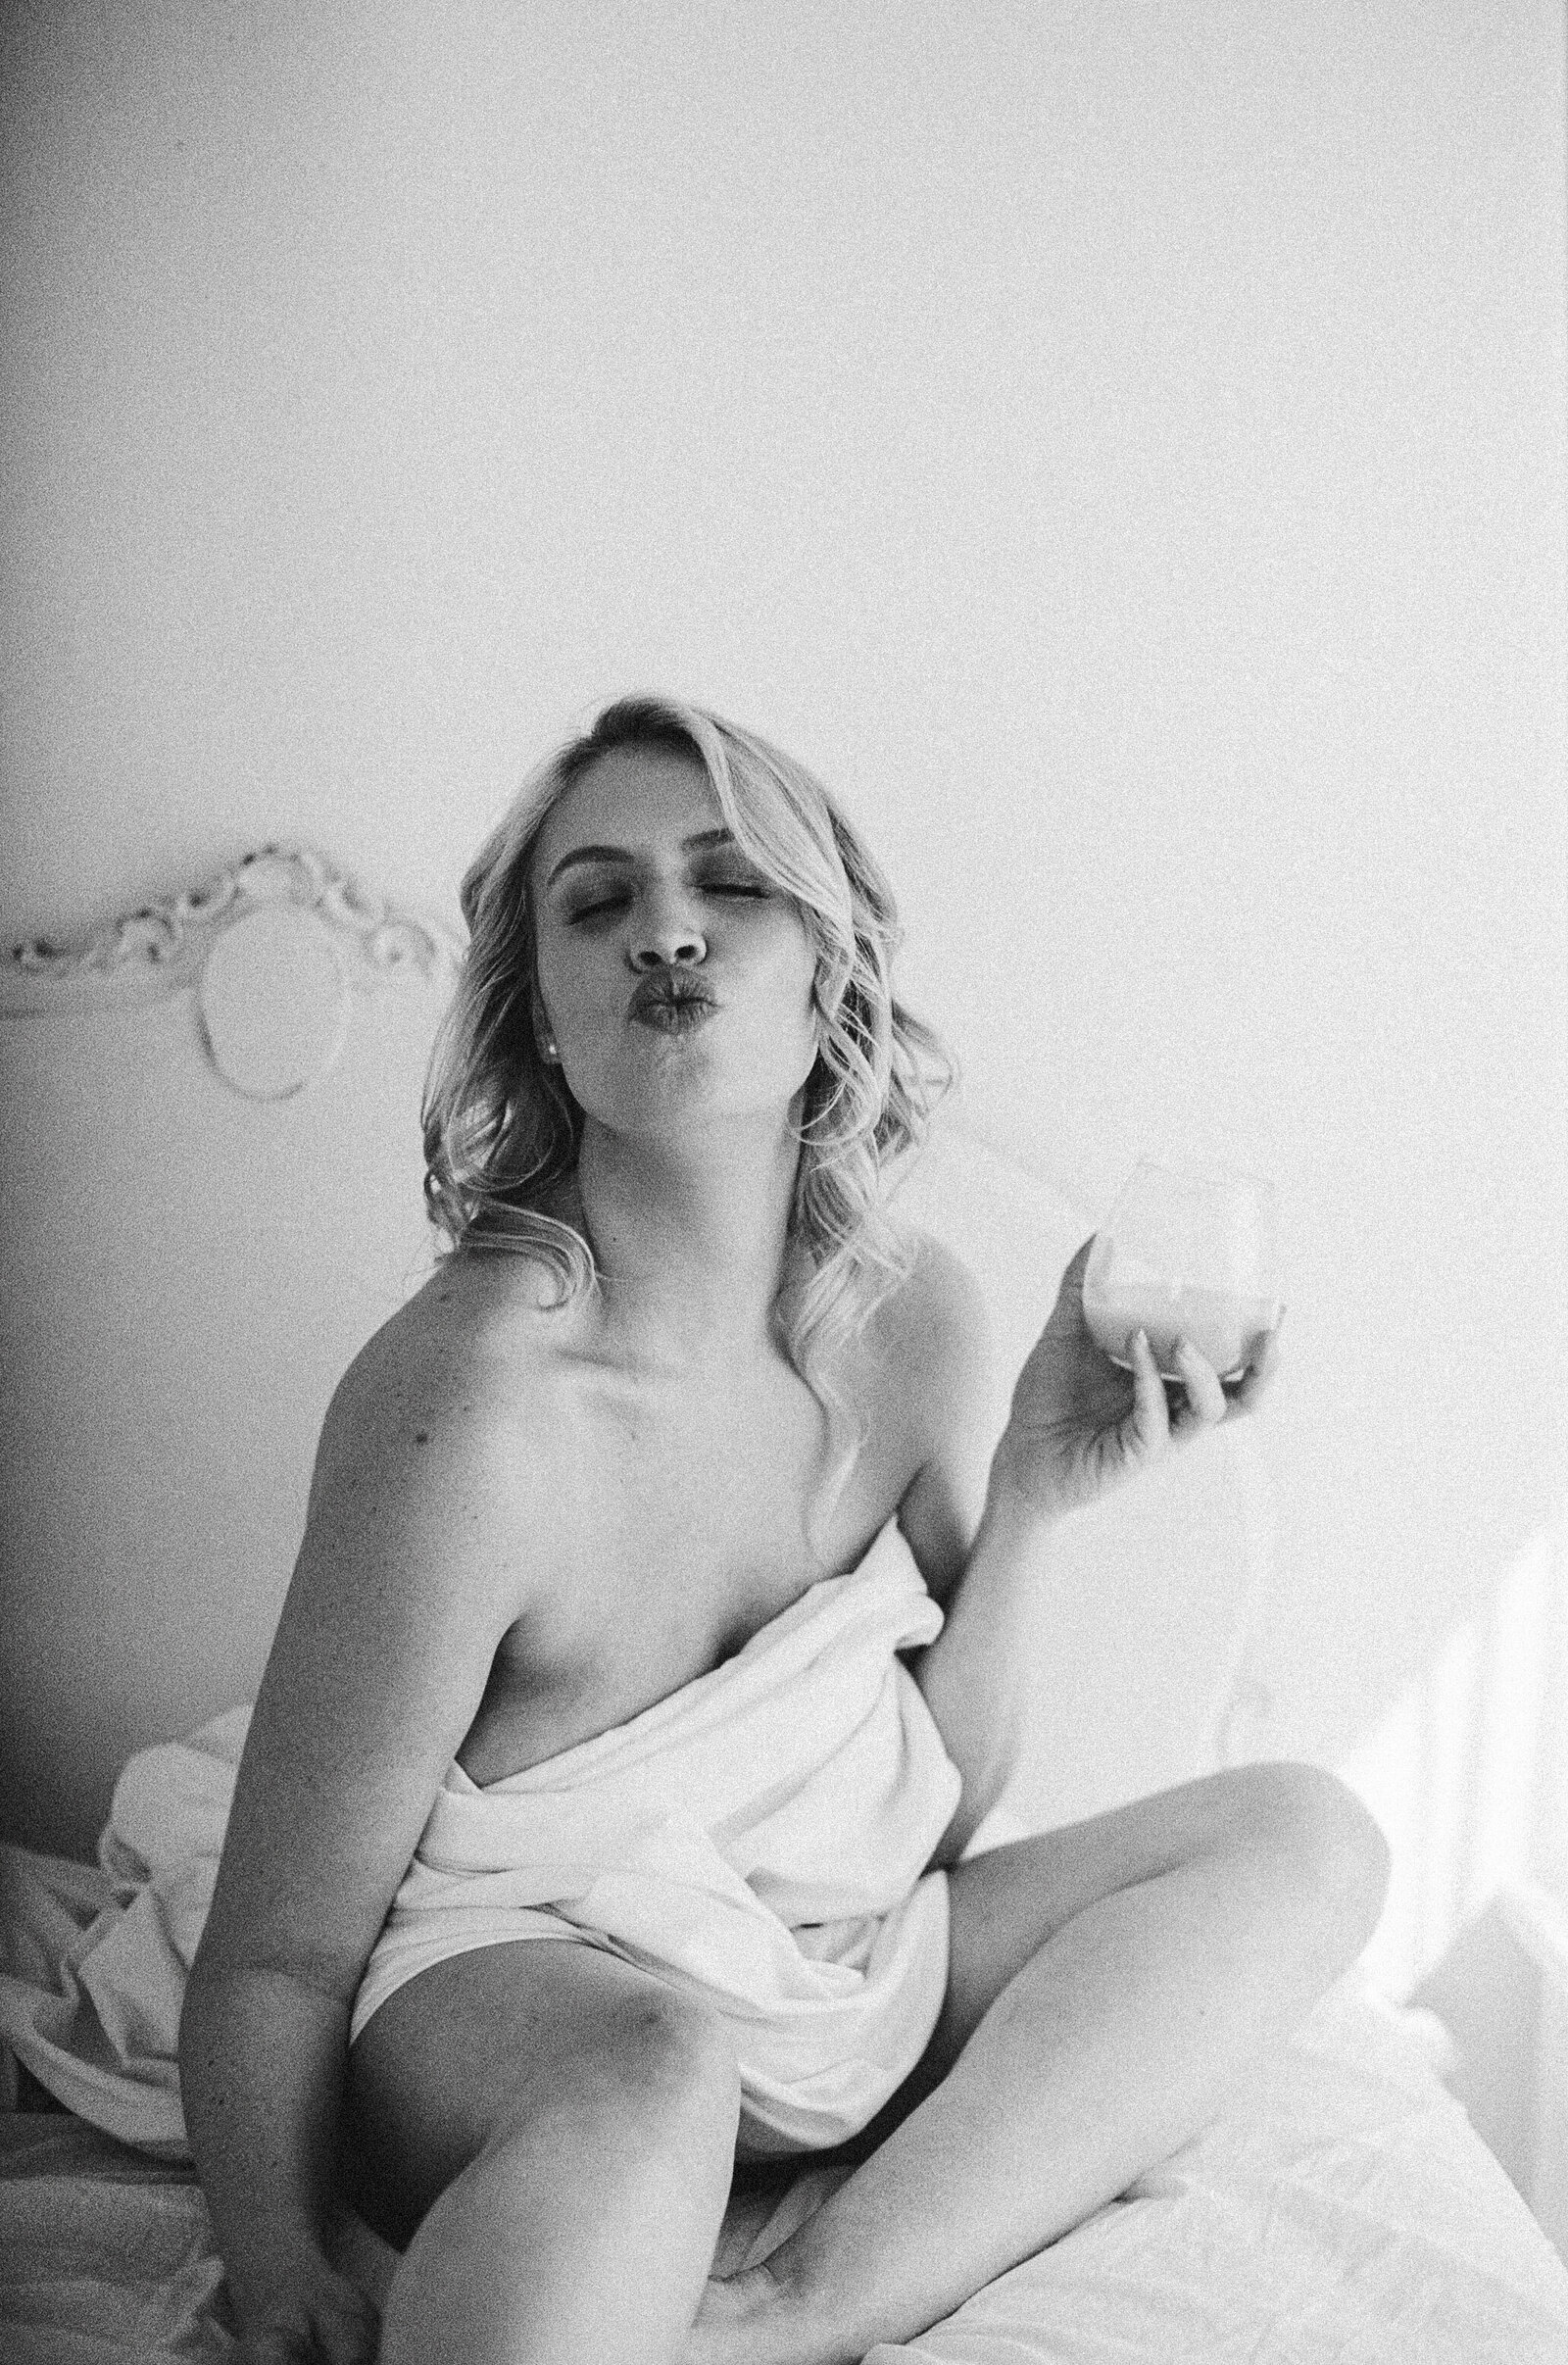 Black and white boudoir photo of woman kissing at the camera